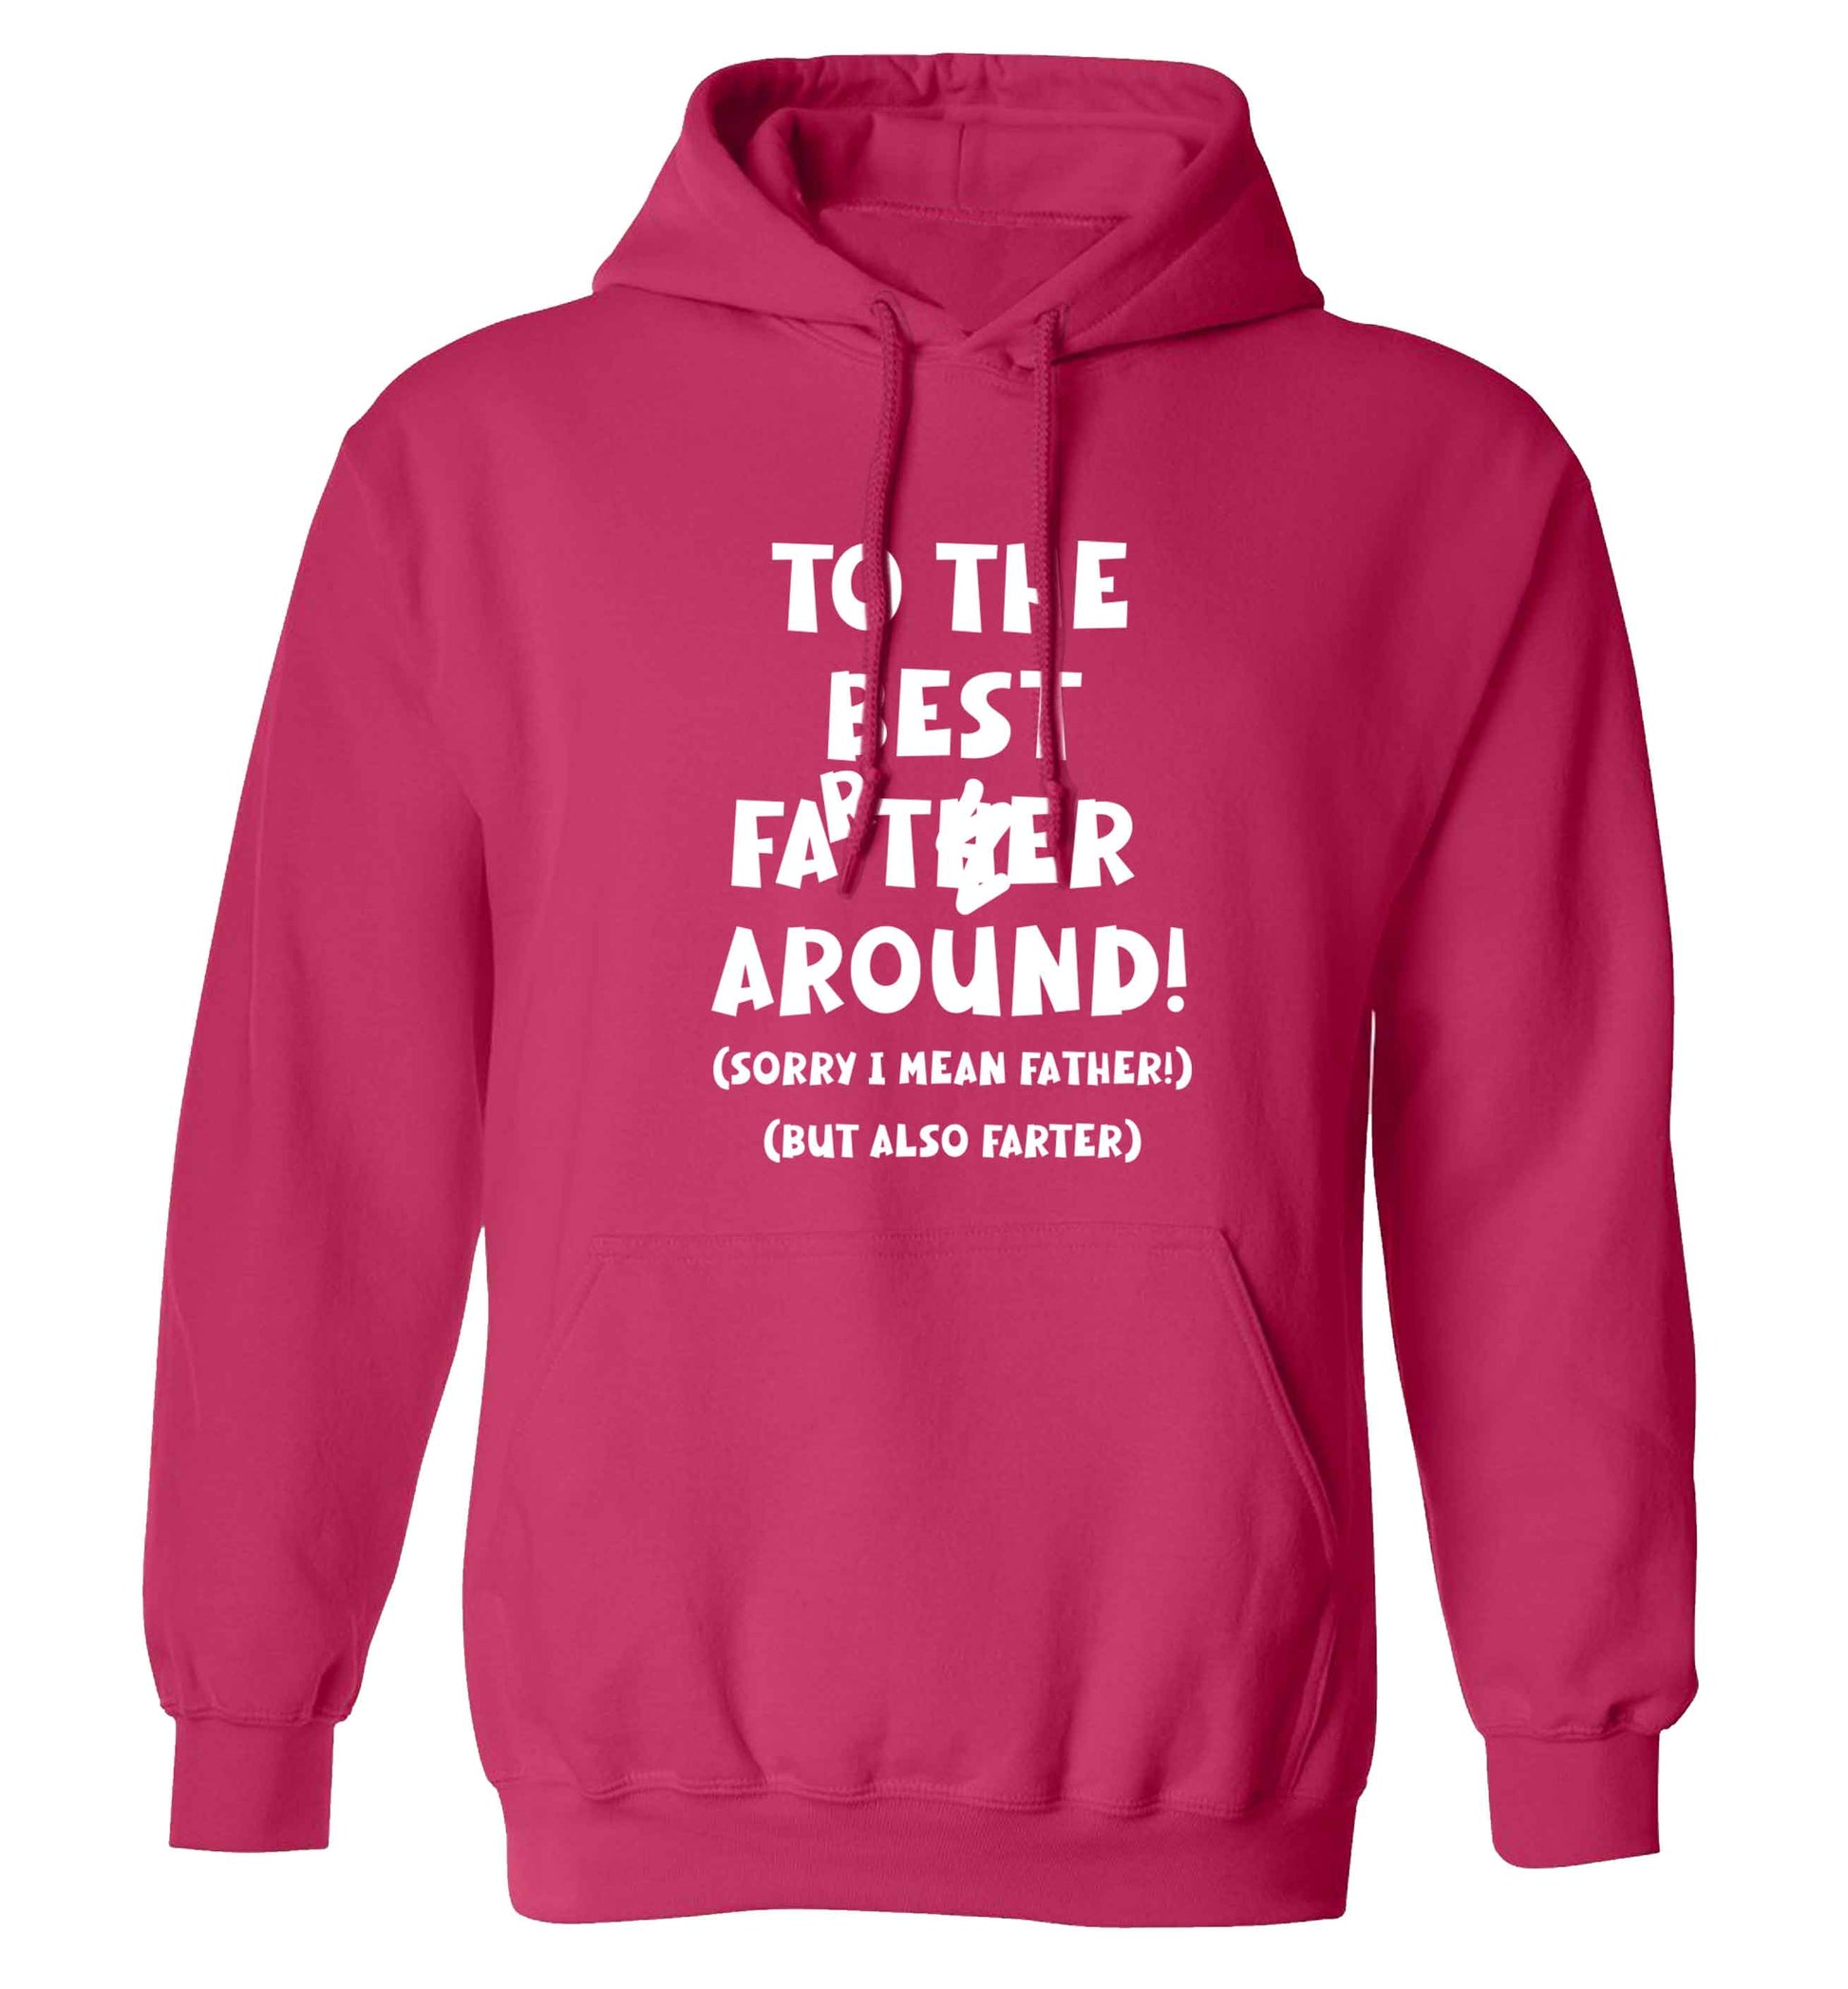 To the best farter around! Sorry I mean father, but also farter adults unisex pink hoodie 2XL